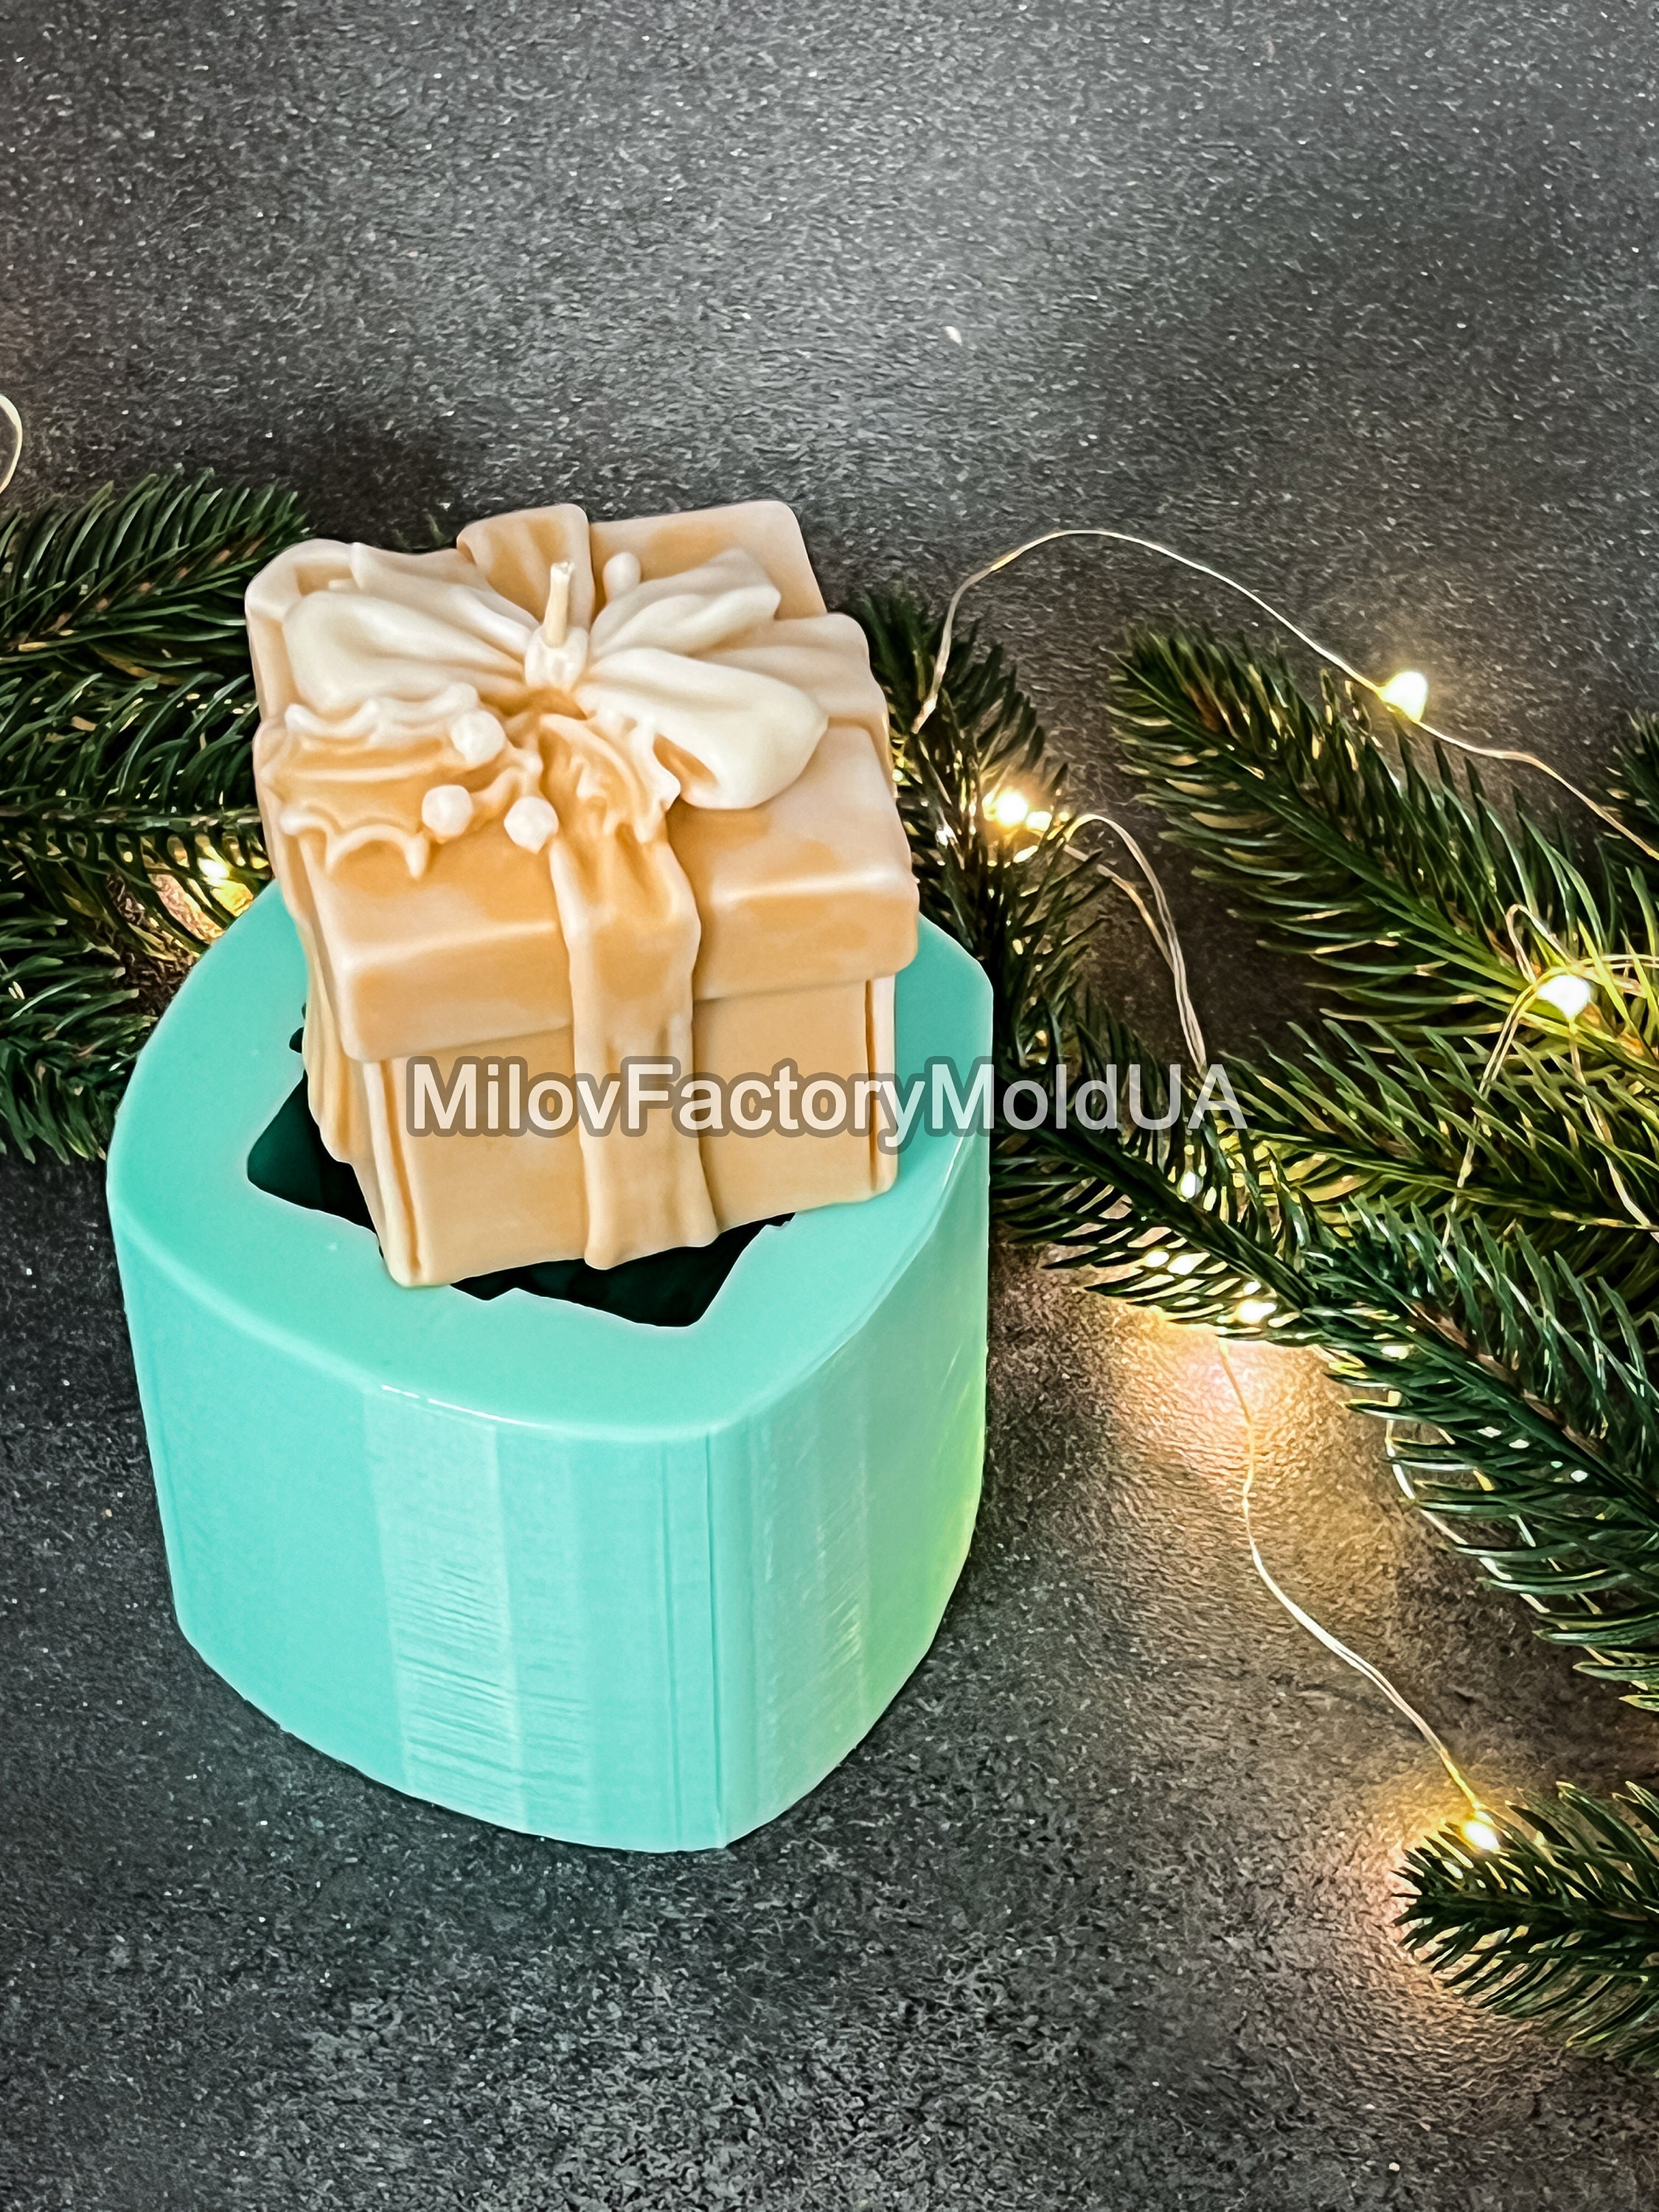 Candle Molds - Silicone Mold for Candles Making, DIY 3D Moulds for Soy Wax,  Beeswax, Scented Candle, Valentine's Day Gifts (Christmas Tree)